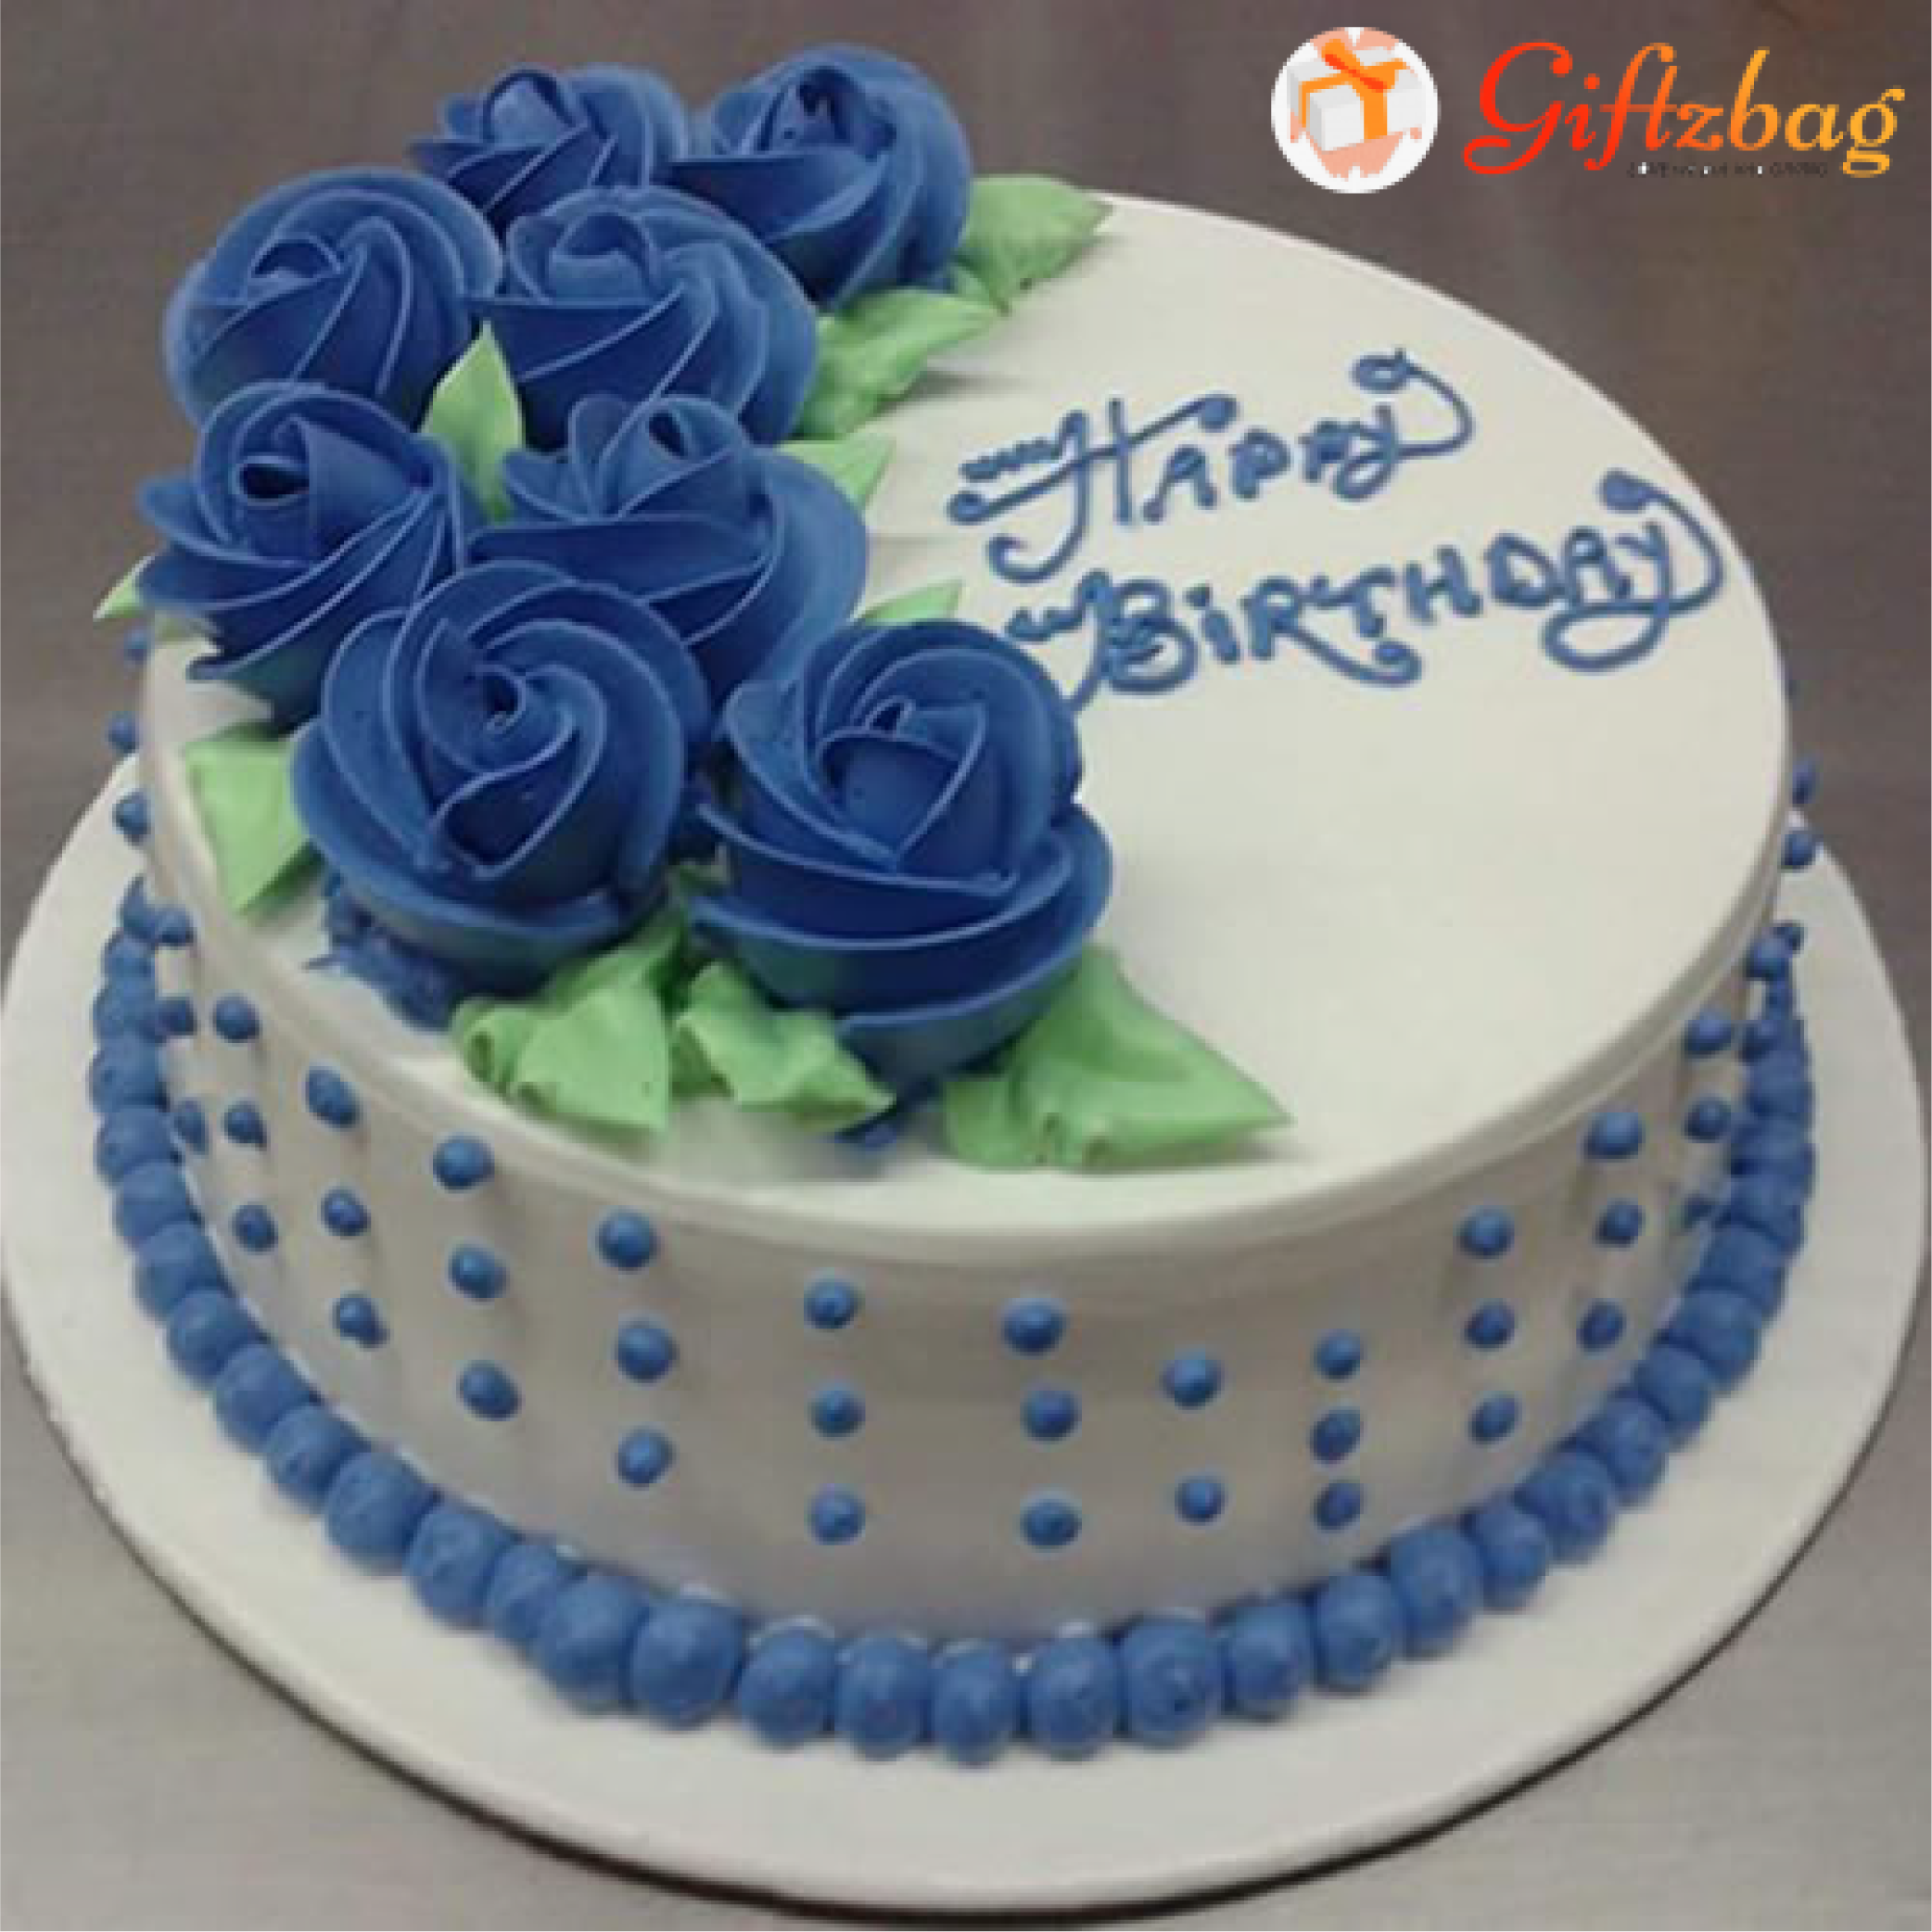 Online Cake Delivery In Jaipur | Send Cakes To Jaipur